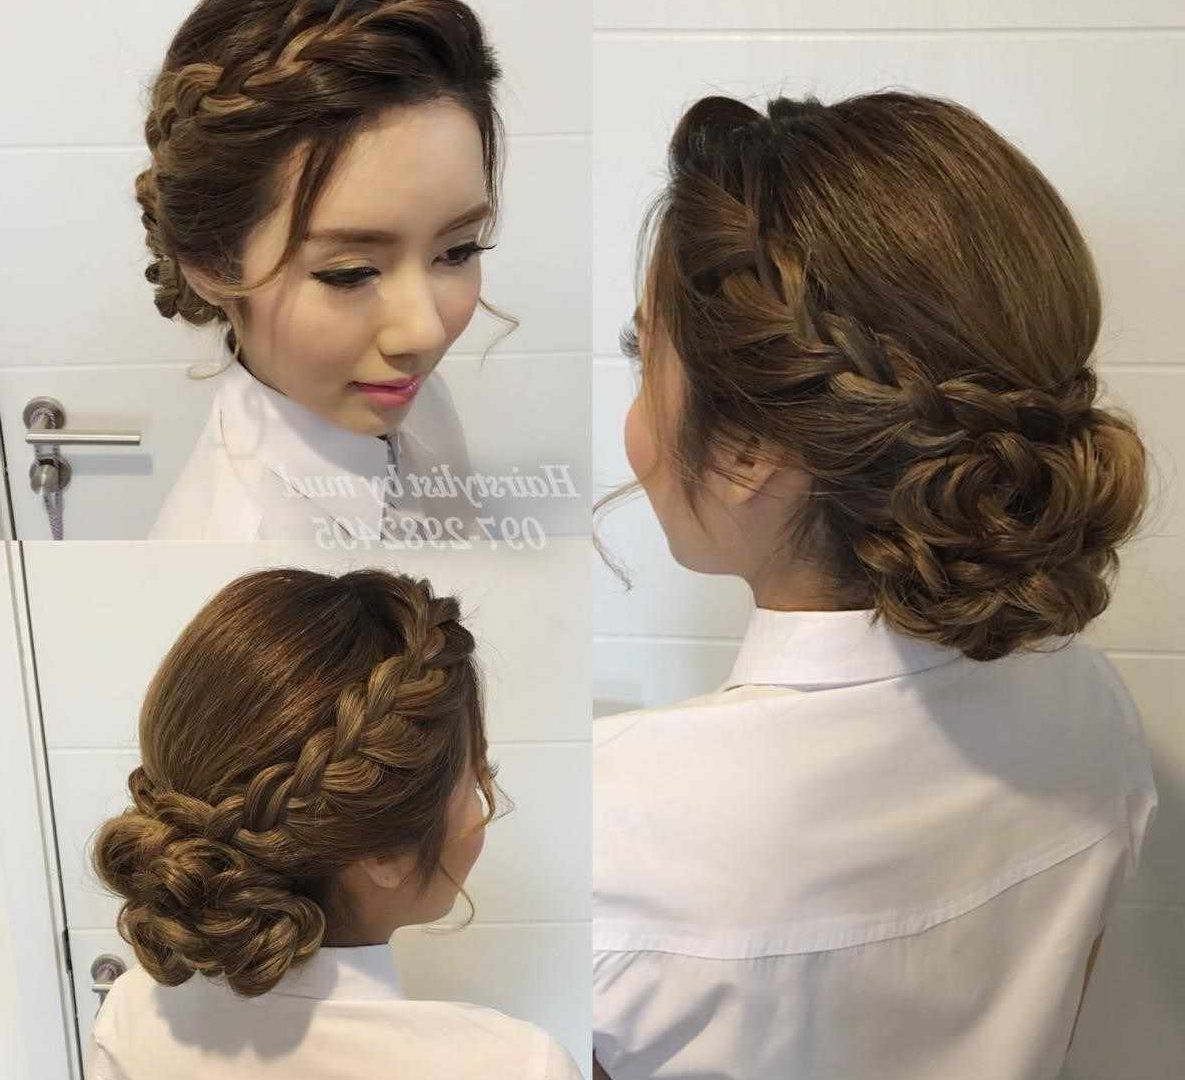 Widely Used Wedding Hairstyles For Mid Length Hair With Fringe Throughout Ideas Stunningdding Hairstyles For Medium Length Hair Half Up Easy (View 8 of 15)